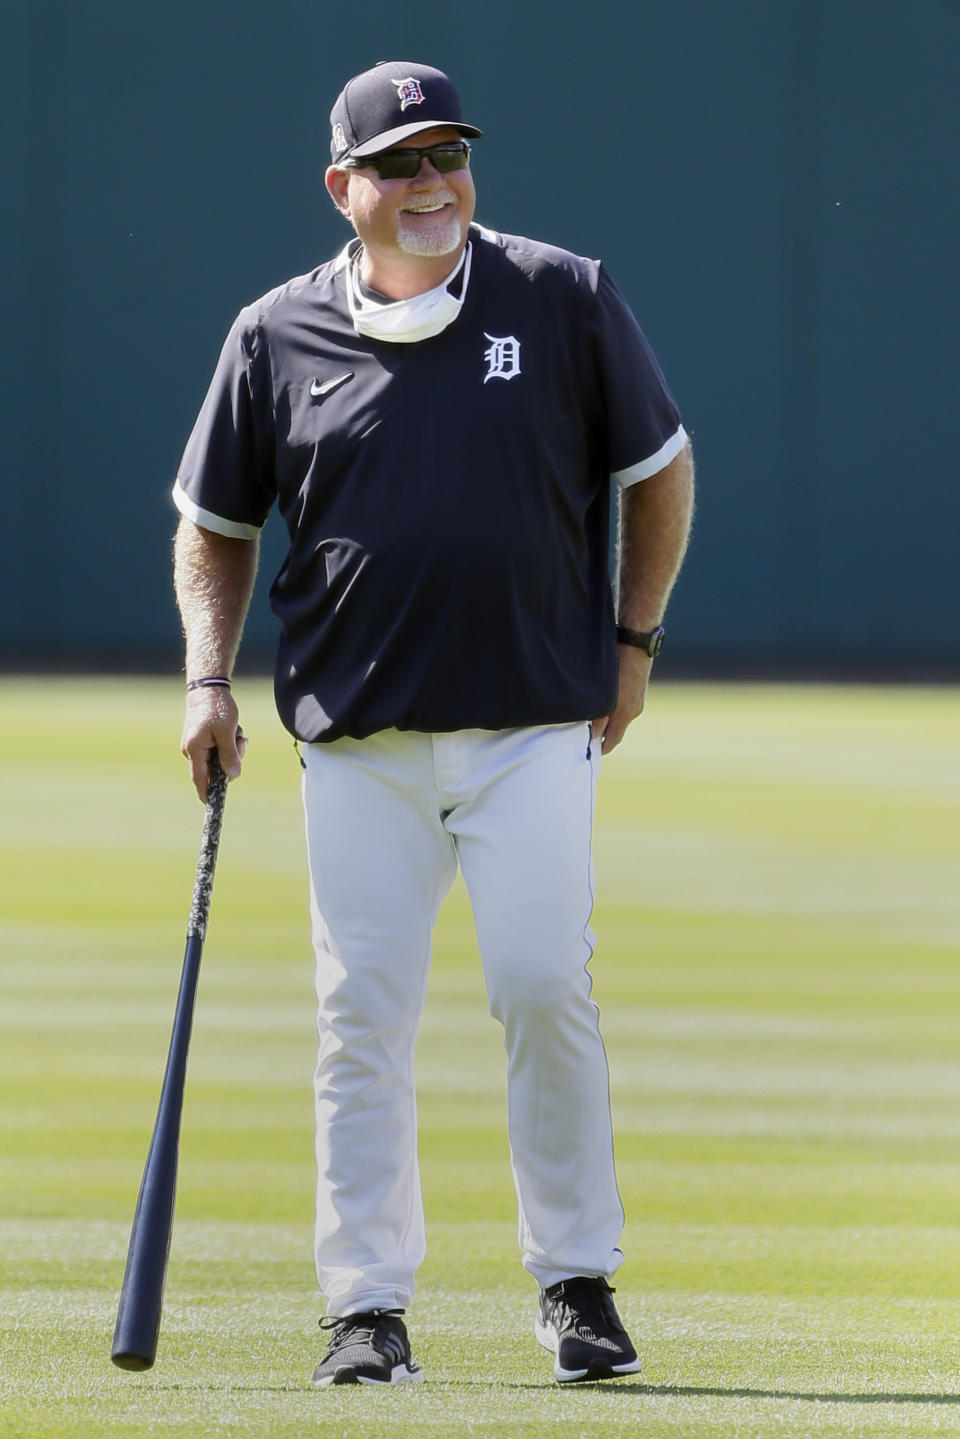 Detroit Tigers manager Ron Gardenhire smiles as baseball training camp begins at Comerica Park, Friday, July 3, 2020, in Detroit. (AP Photo/Duane Burleson)